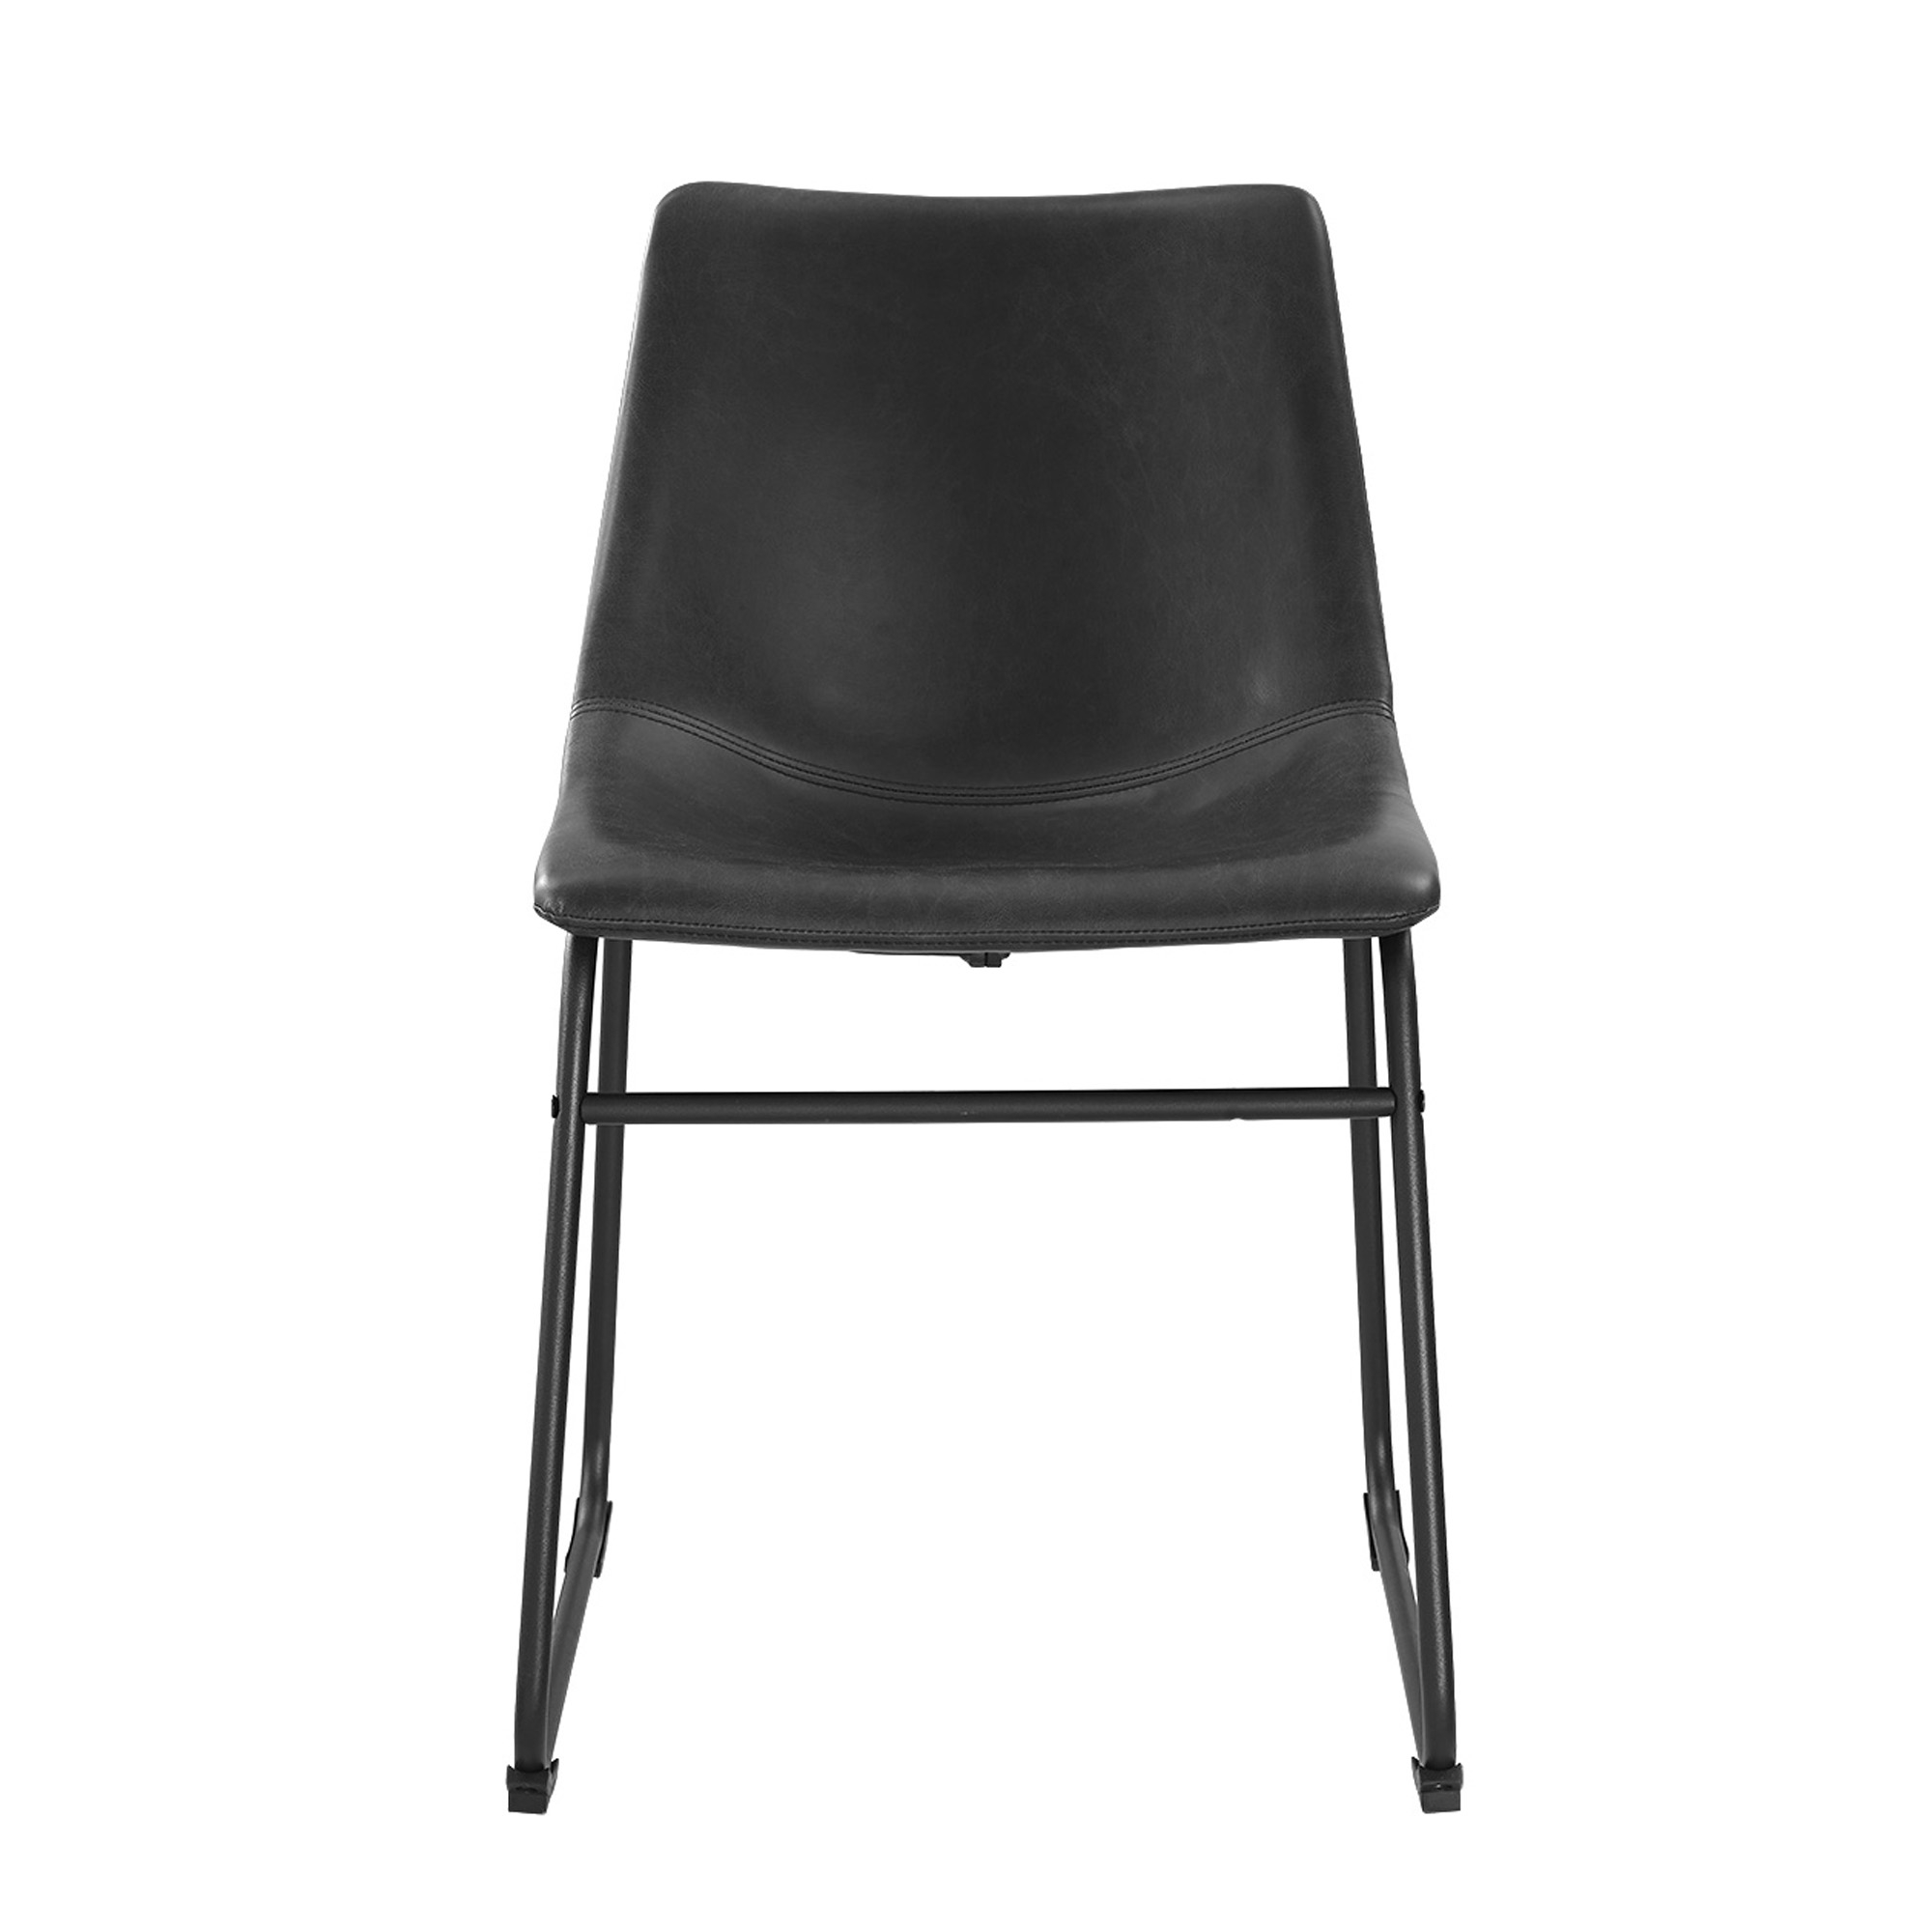 18" Industrial Faux Leather Dining Chair, Set of 2 - Black - Image 2